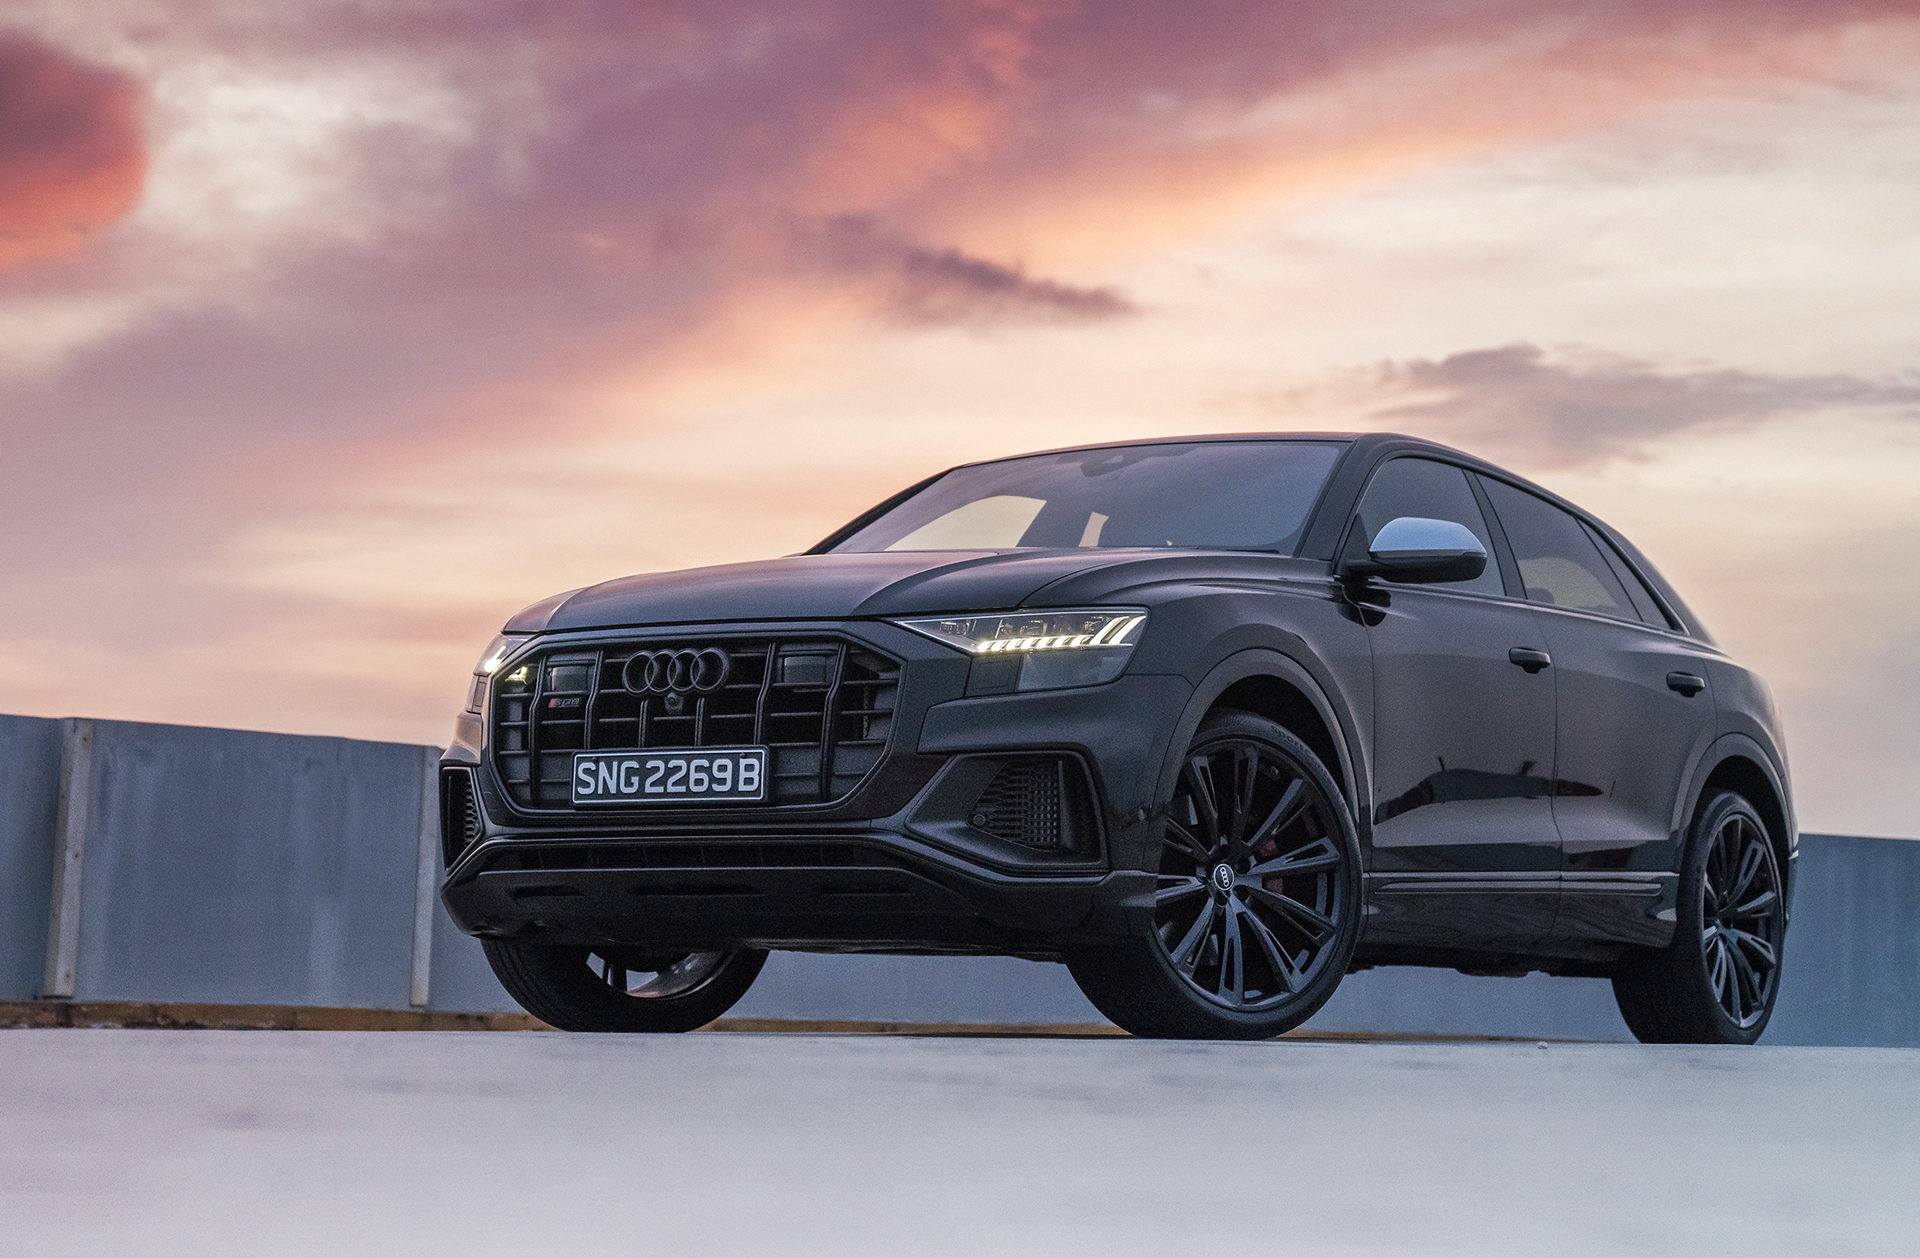 50 shades of black, driving the new Audi SQ8